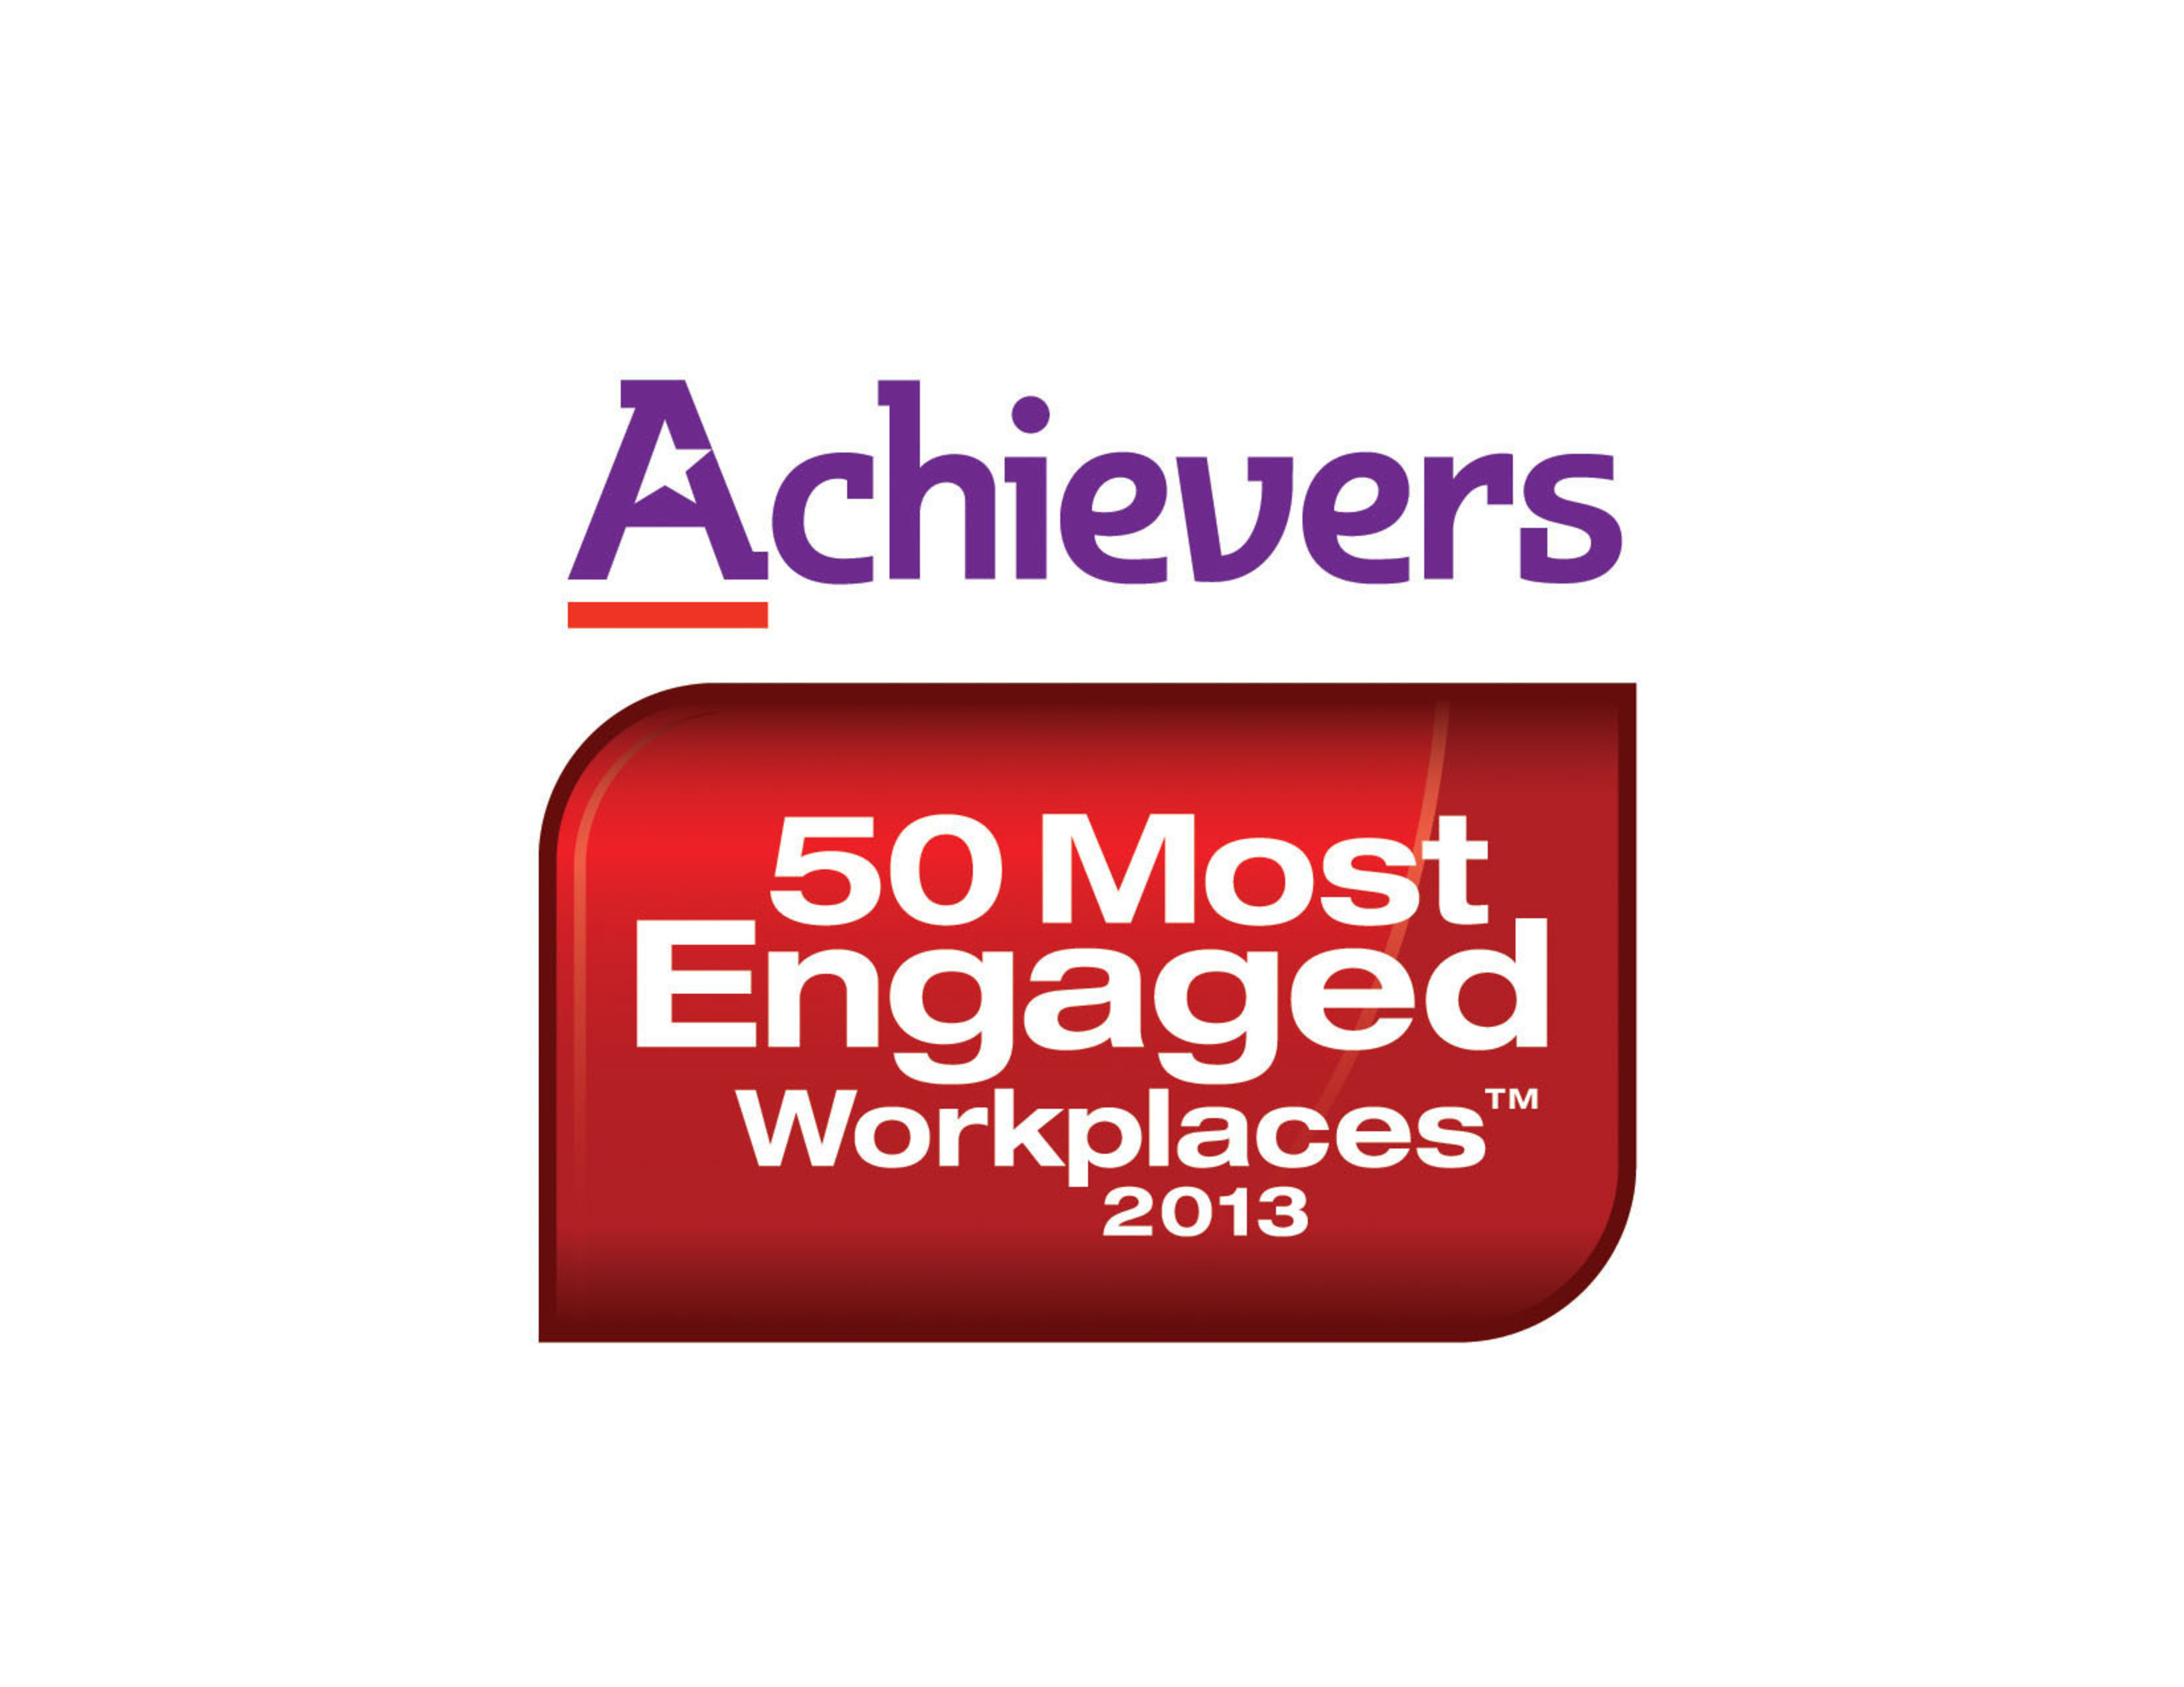 Achievers 50 Most Engaged Workplaces announced! (PRNewsFoto/Achievers) (PRNewsFoto/ACHIEVERS)